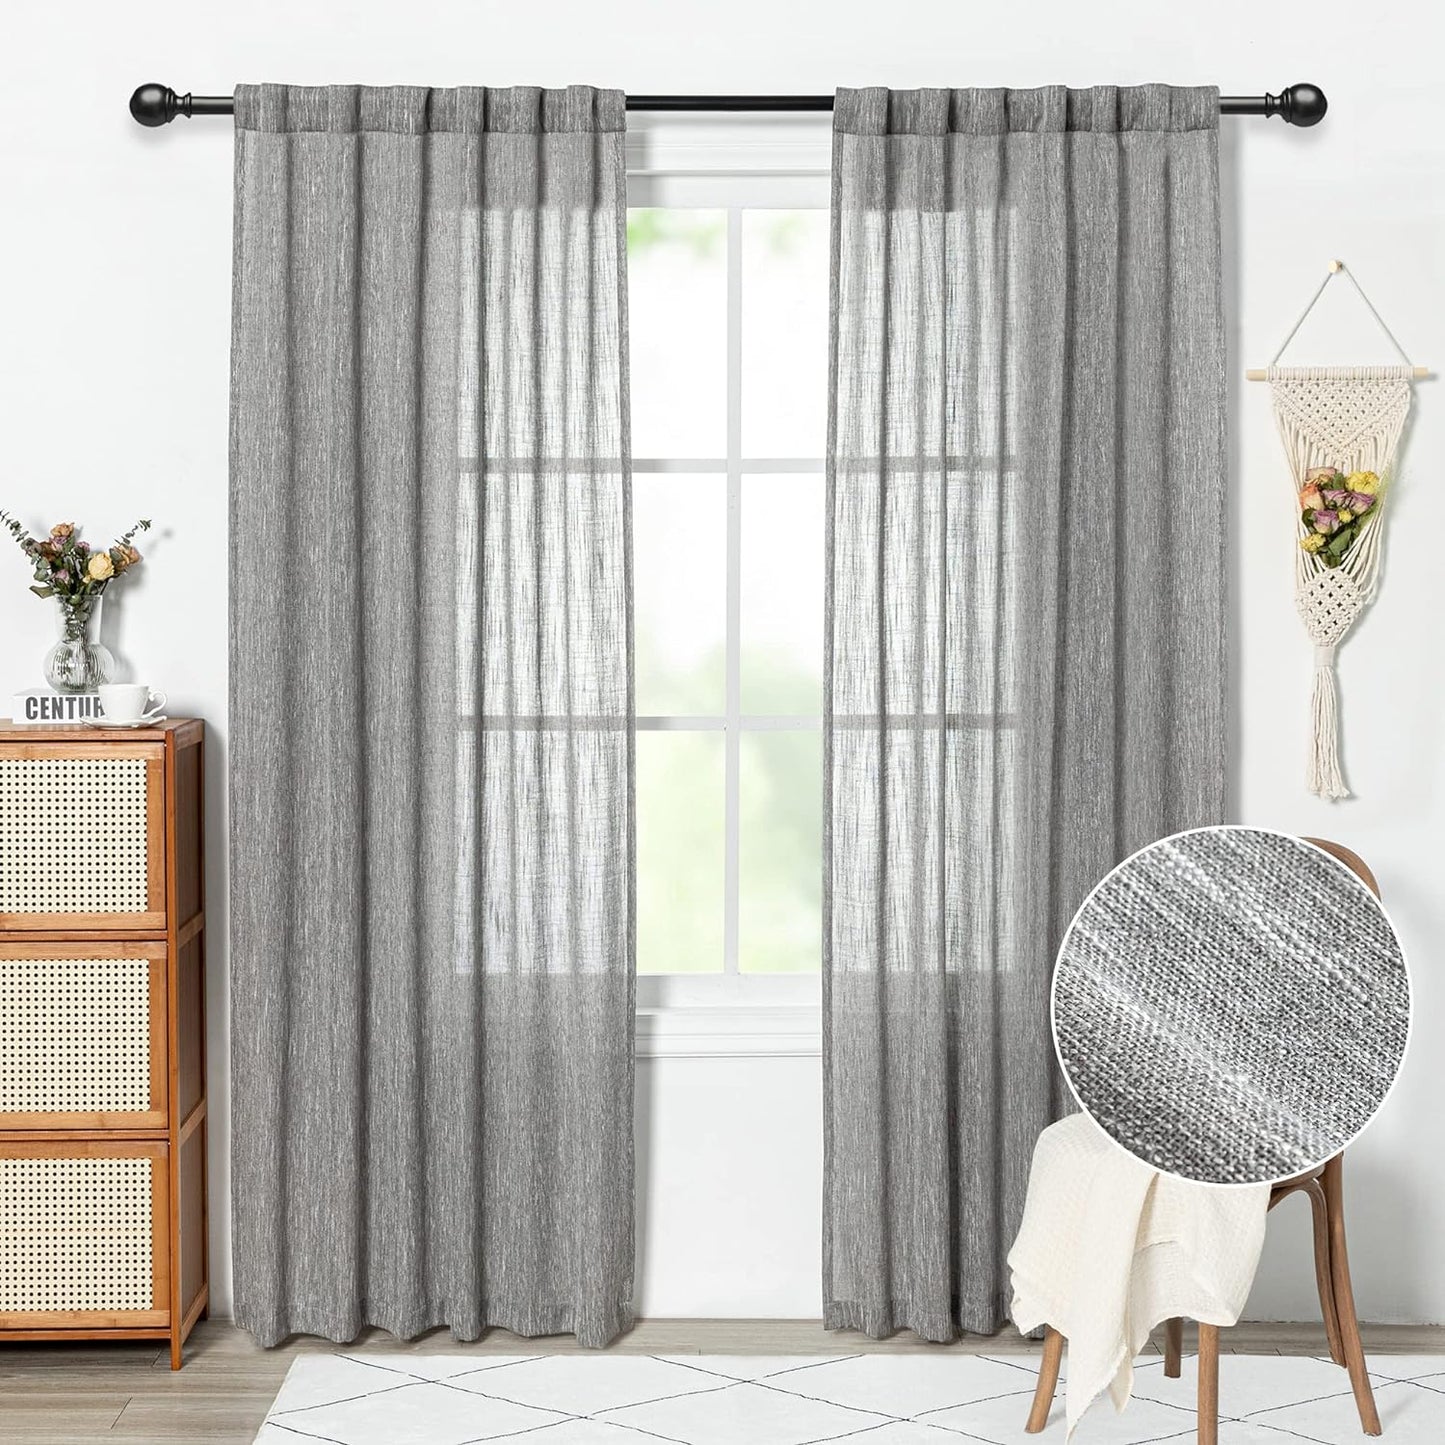 MYSKY HOME 90 Inch Curtains for Sliding Glass Door Windows, Living Room Decoration Cotton Drapes Soft Comfortable Touch Farmhouse Country Patio Treatment Set, 50" Width, Natural, 2 Panels  MYSKYTEX Dark Grey 50"W X 90"L 